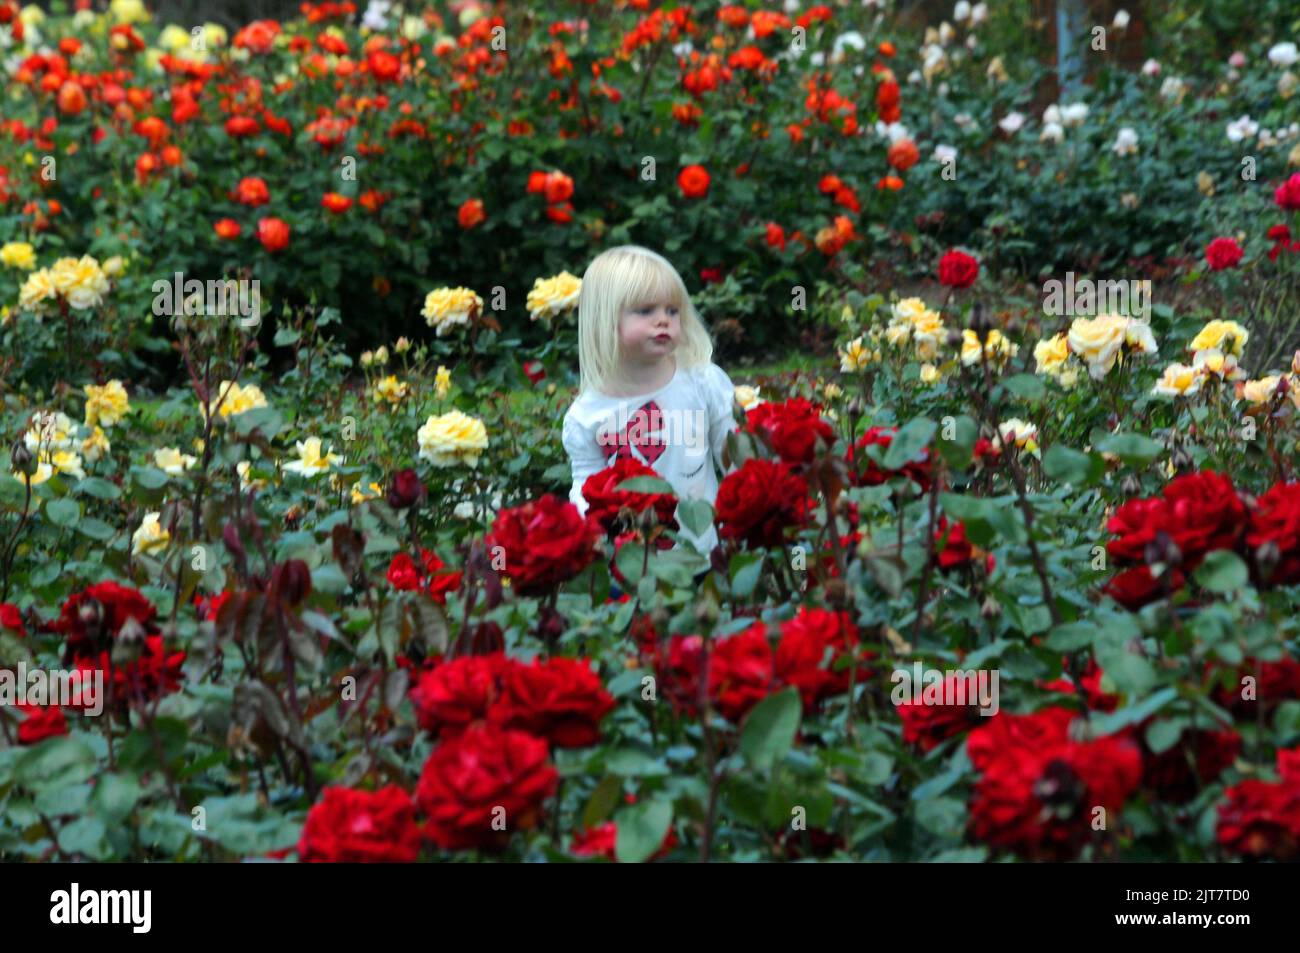 2 YEAR OLD LILY EVANS MAKES THE MOST OF THE WEATHER TO ENJOY A STROLL AMONGST THE ROSES AT THE ROSE GARDEN AT SOUTHSEA, HANTS. PIC MIKE WALKER, MIKE WALKER PICTURES, 2012 Stock Photo